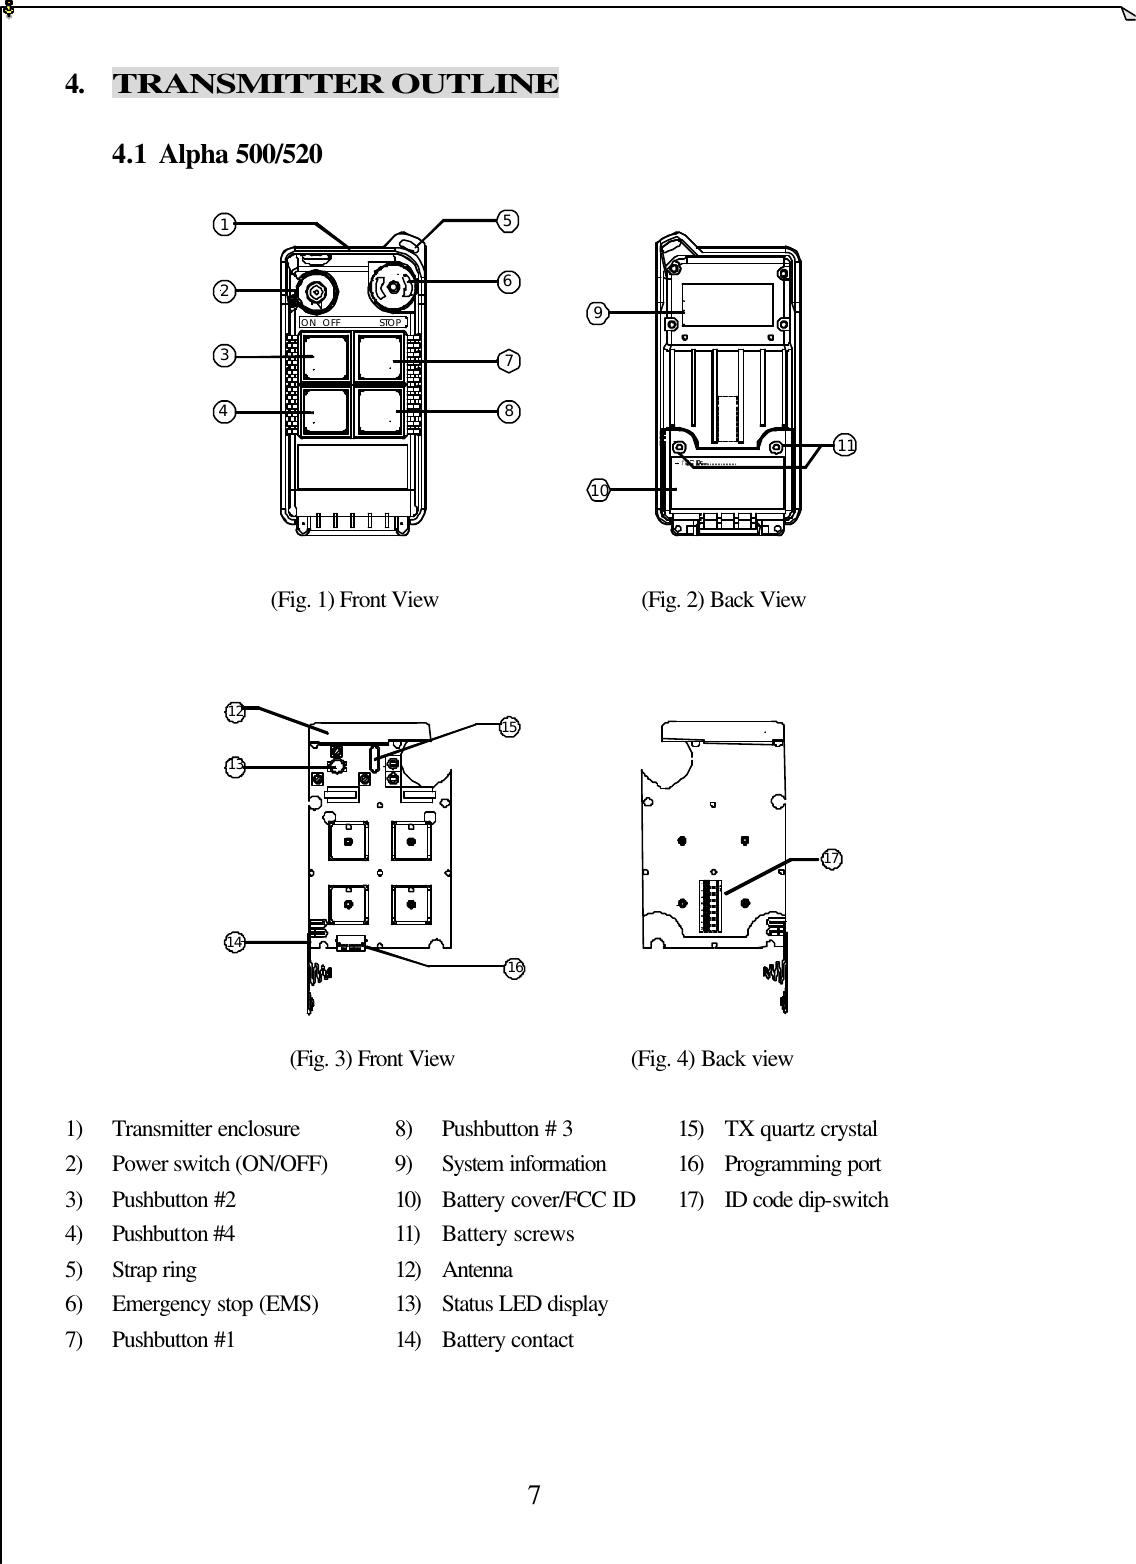  7 4. TRANSMITTER OUTLINE              4.1 Alpha 500/520            (Fig. 1) Front View                       (Fig. 2) Back View          (Fig. 3) Front View          (Fig. 4) Back view  1) Transmitter enclosure    8) Pushbutton # 3      15) TX quartz crystal 2) Power switch (ON/OFF)    9) System information    16) Programming port 3) Pushbutton #2    10) Battery cover/FCC ID 17) ID code dip-switch   4) Pushbutton #4     11) Battery screws       5) Strap ring     12) Antenna       6) Emergency stop (EMS)    13) Status LED display         7) Pushbutton #1    14) Battery contact       1234567891011ON  OFF STOP121314151617